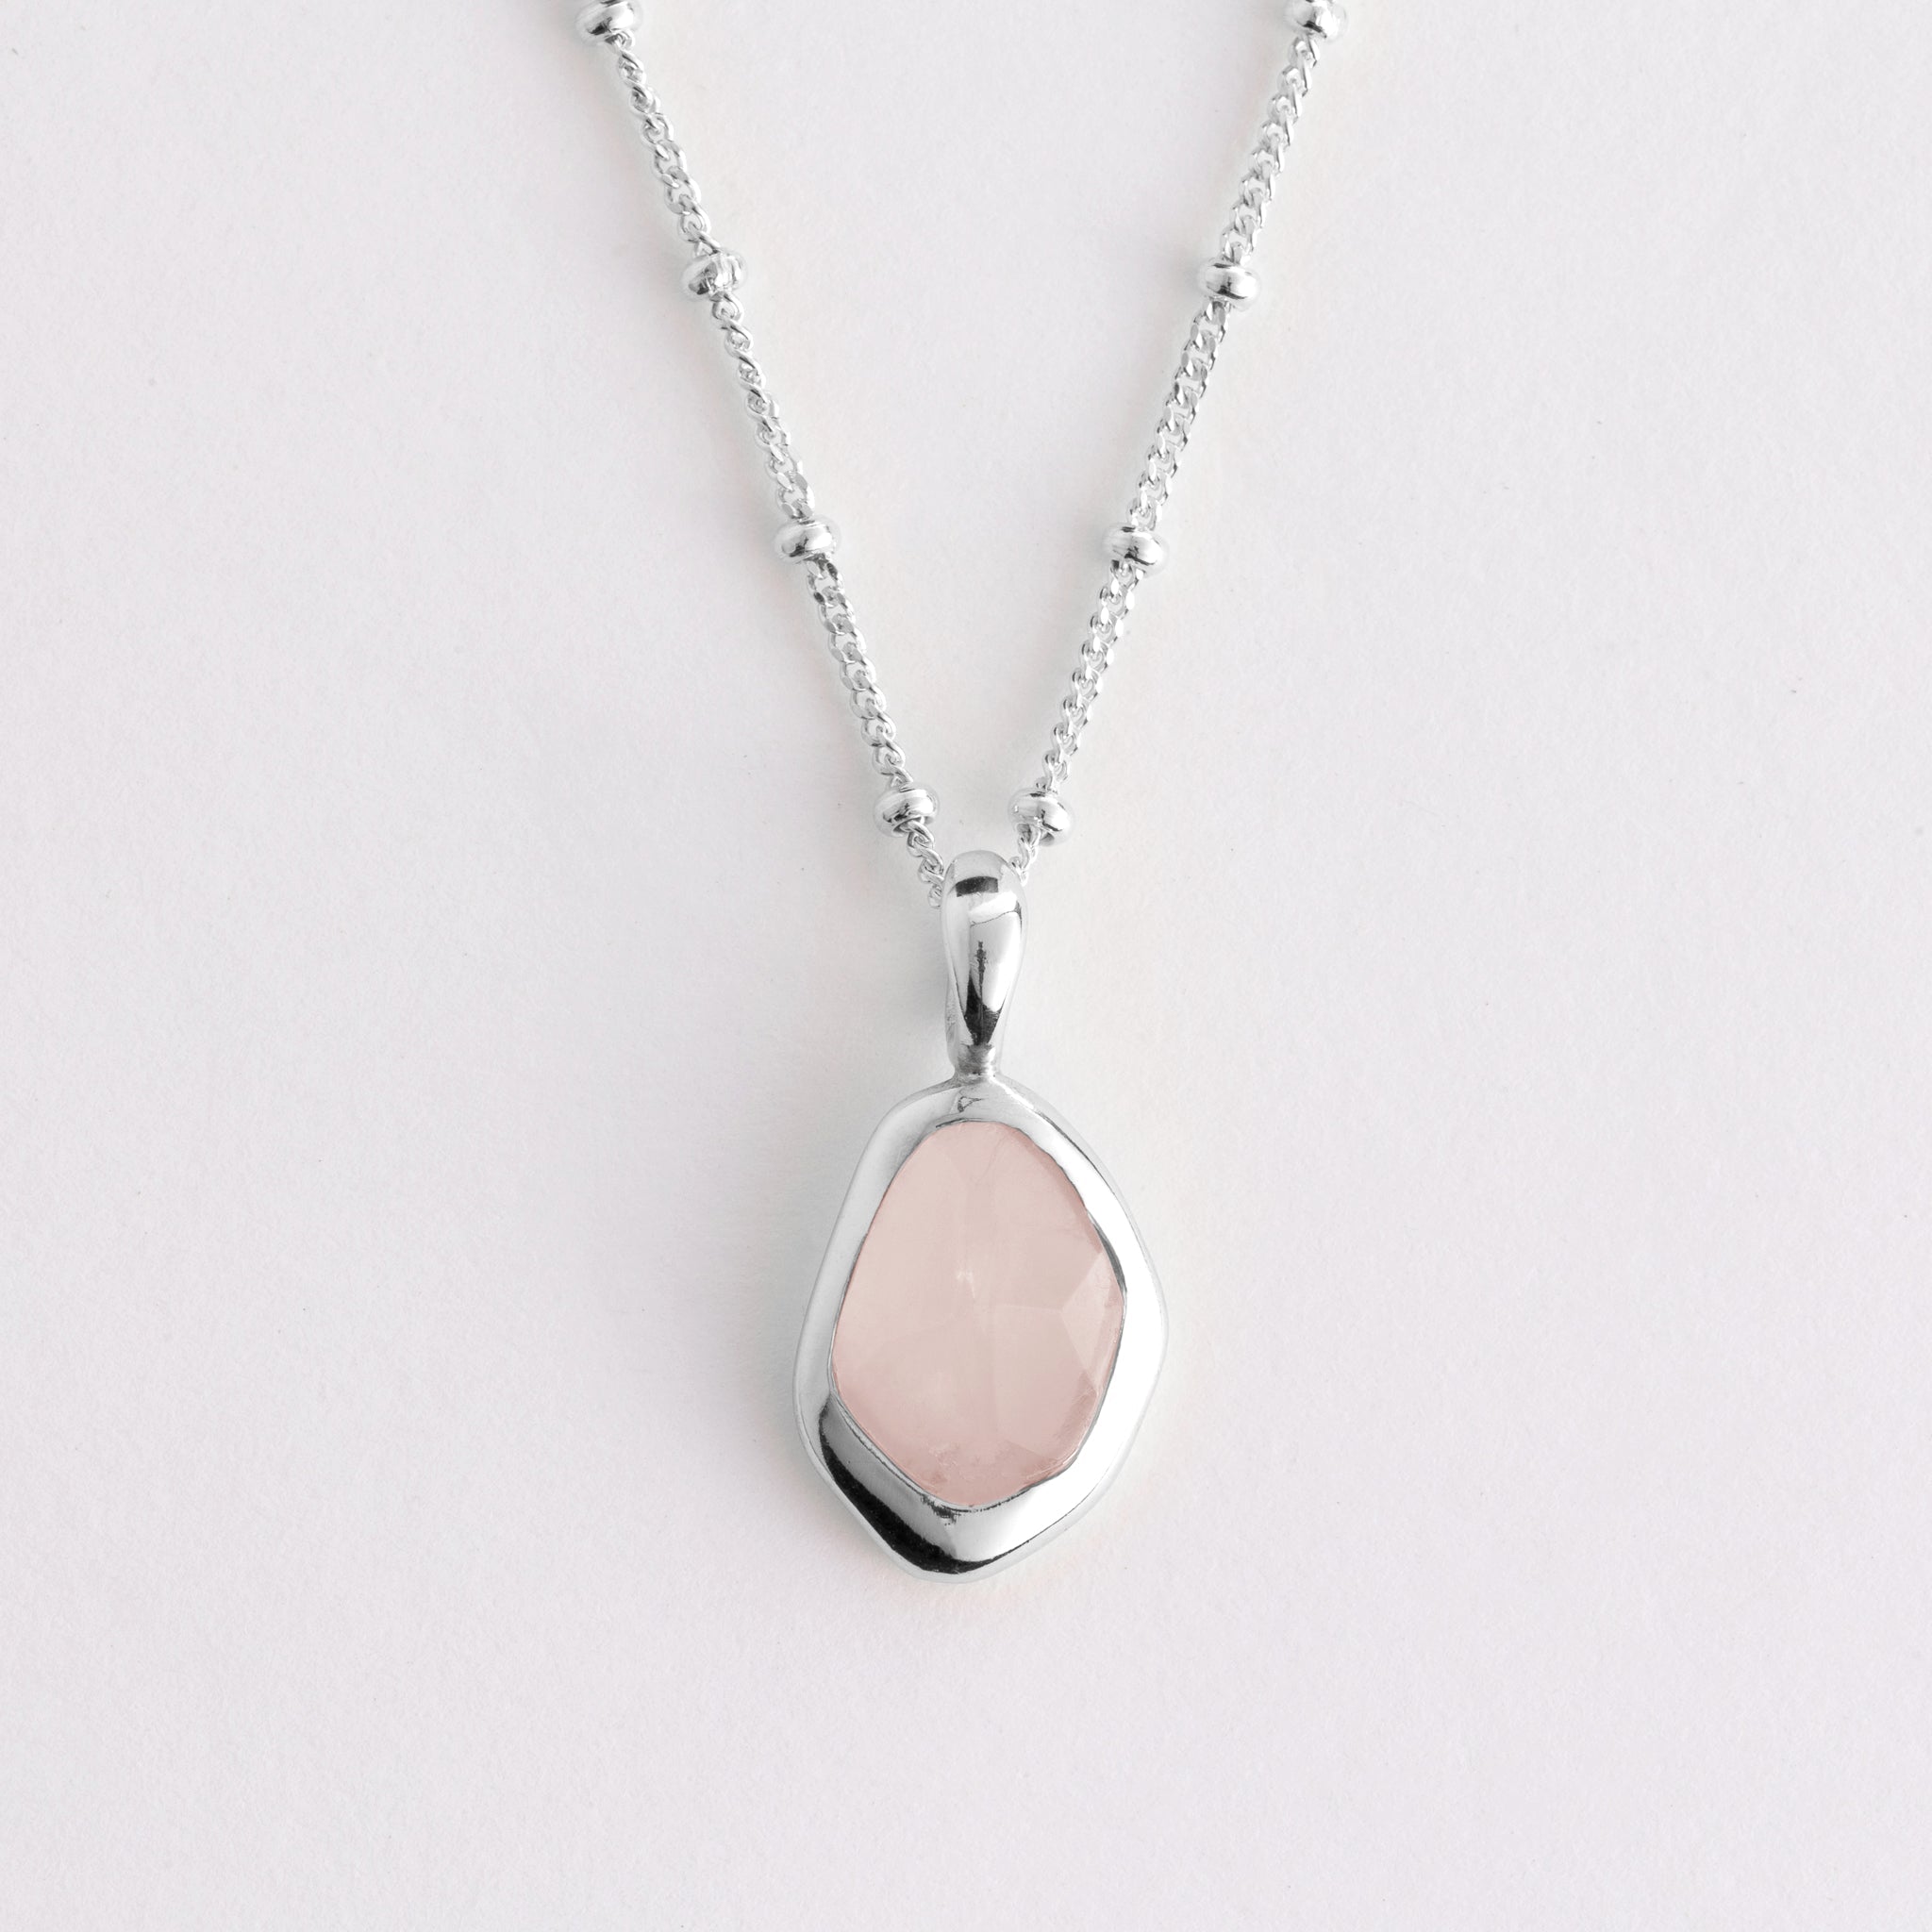 Pendant features a sparkling, handcut natural gemstone and is crafted from sterling silver or 18ct gold vermeil.